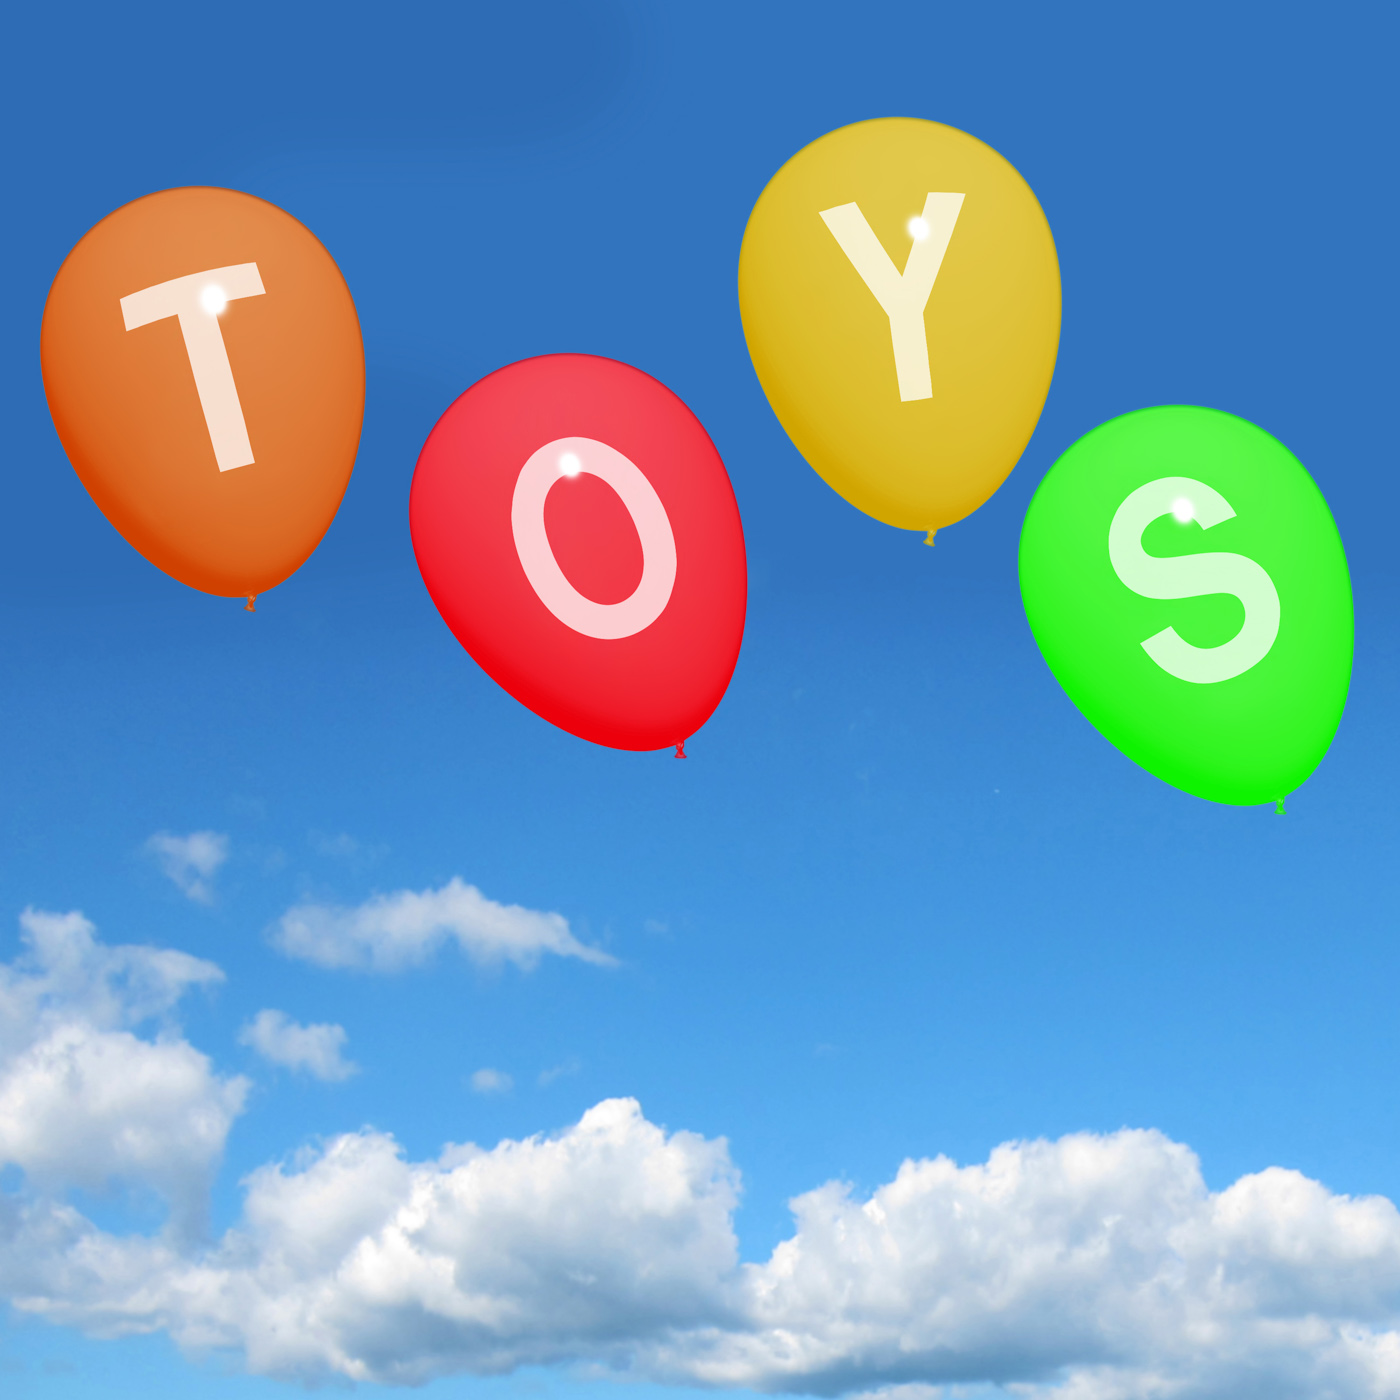 Toys balloons represent kids and childrens playthings photo